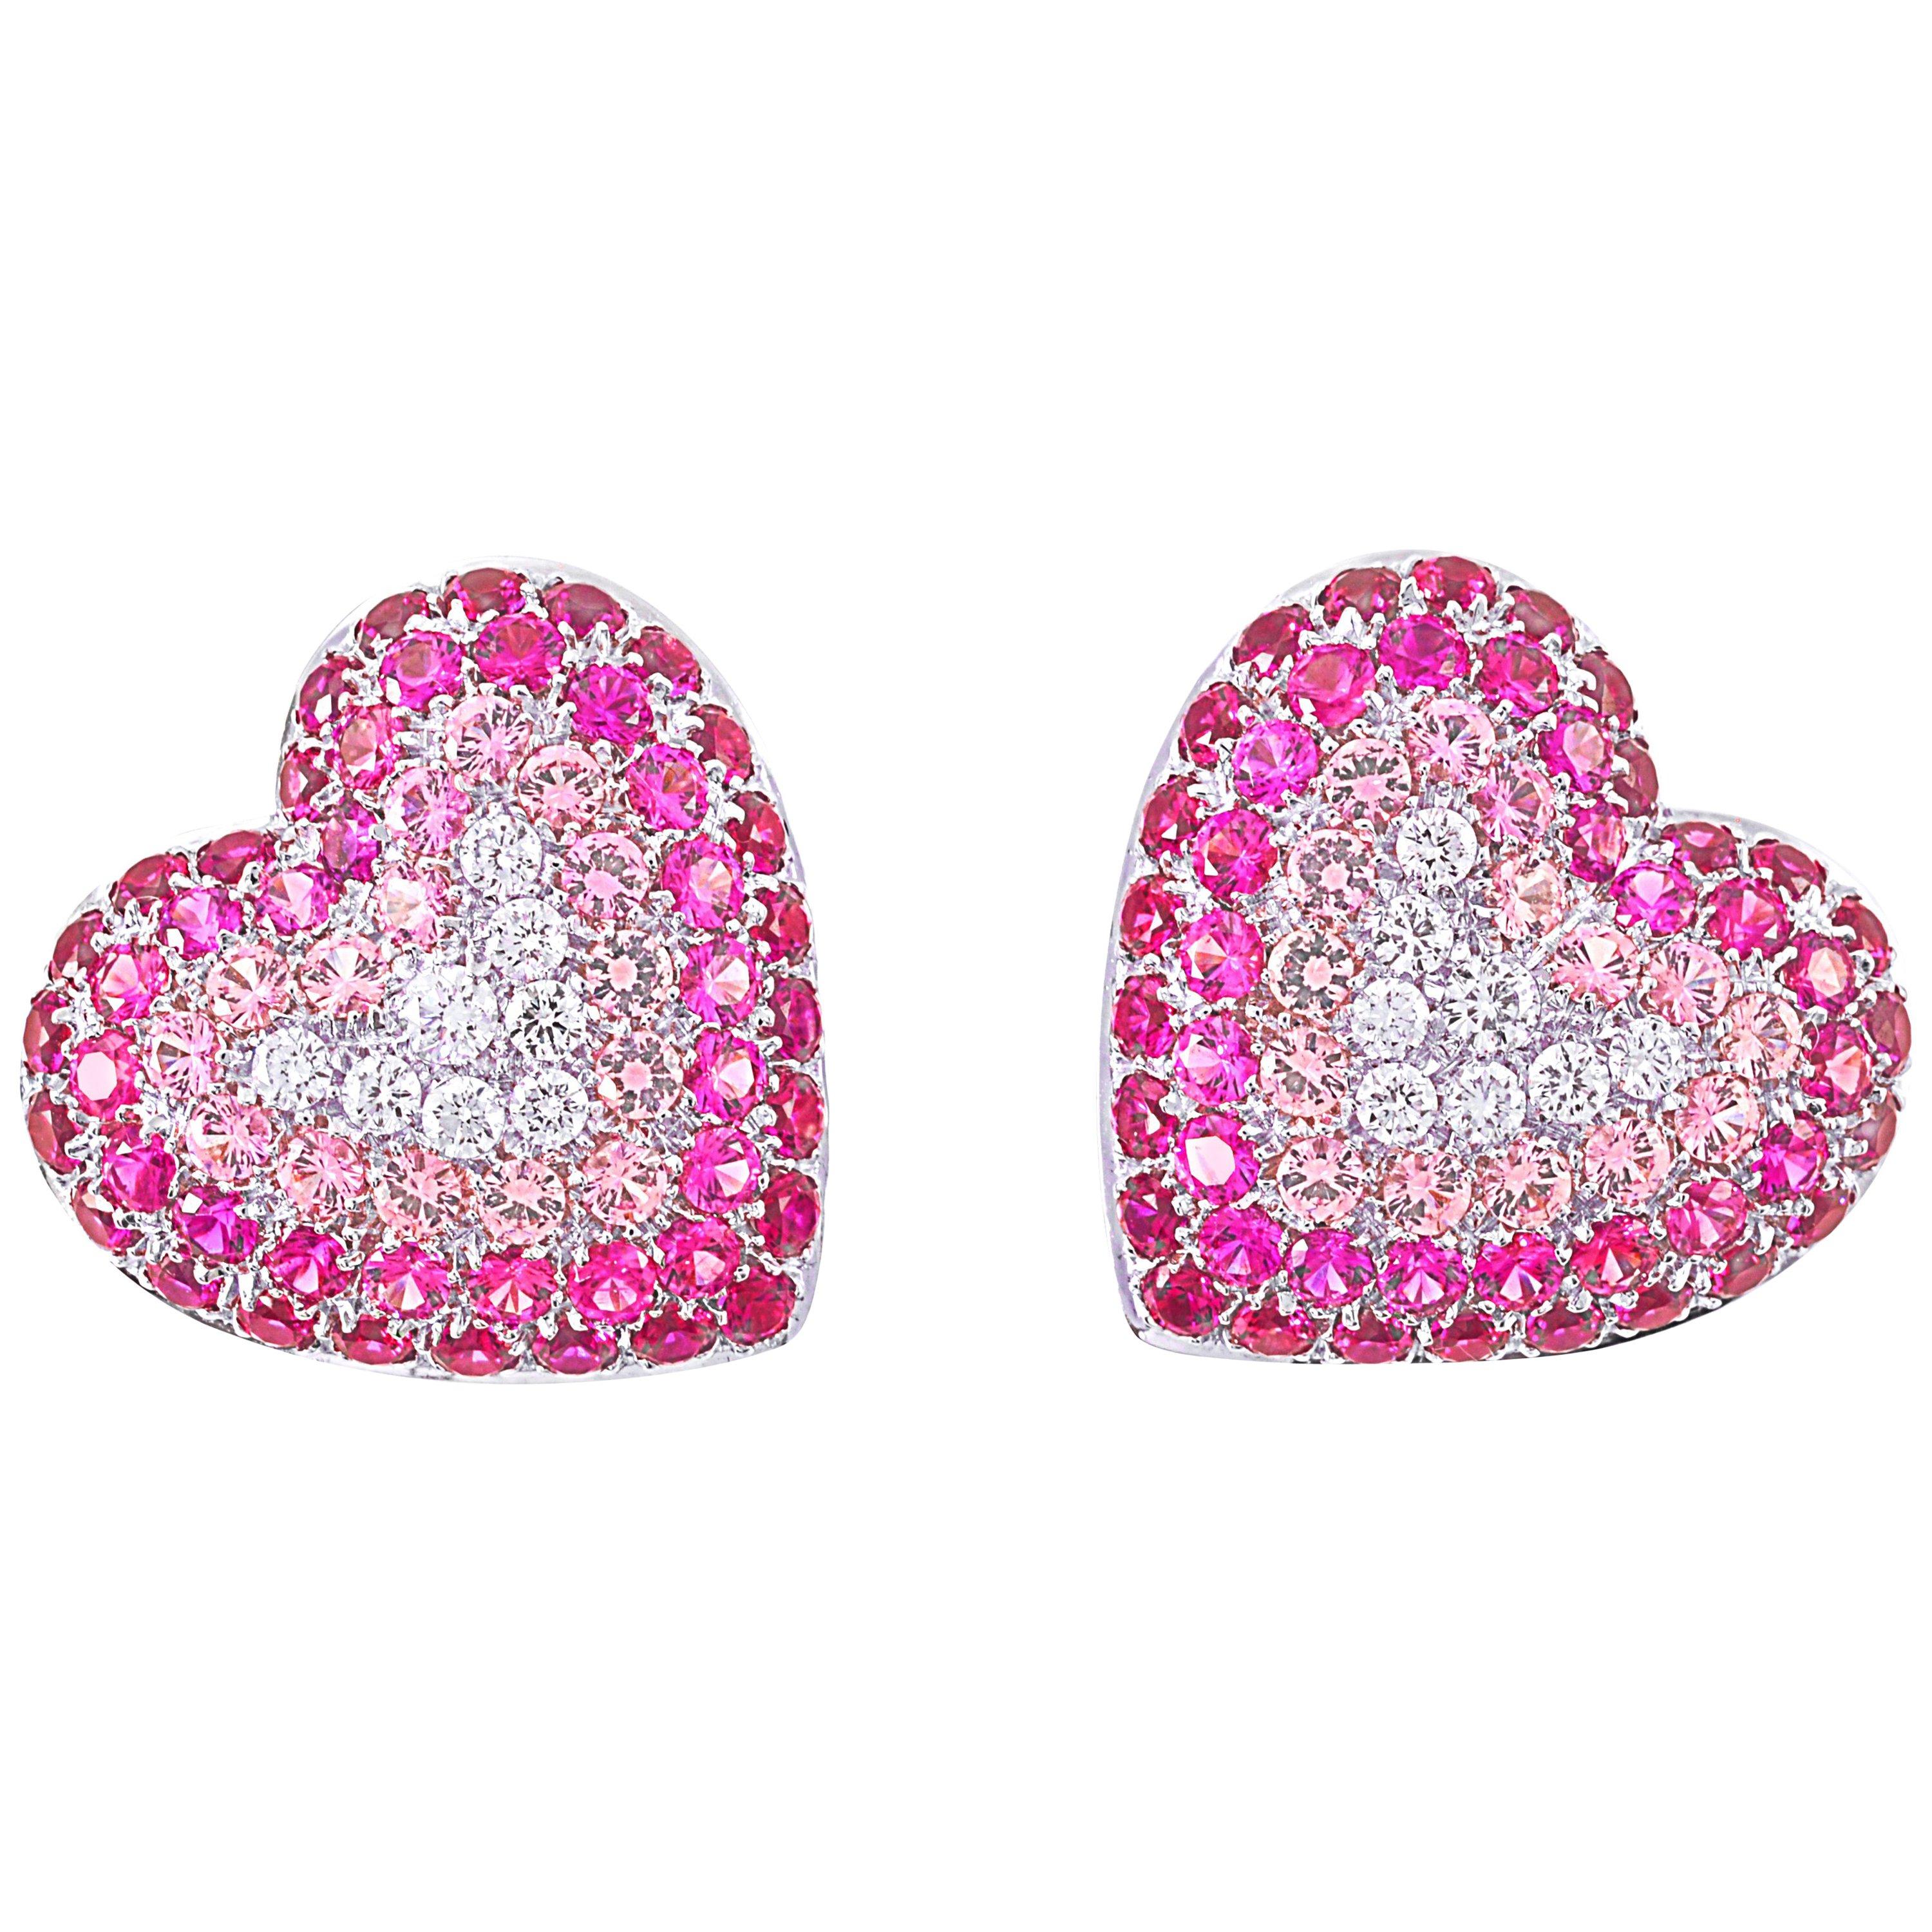 Picchiotti White Gold Diamonds, Rubies and Pink Sapphire Heart-Shaped Earrings For Sale